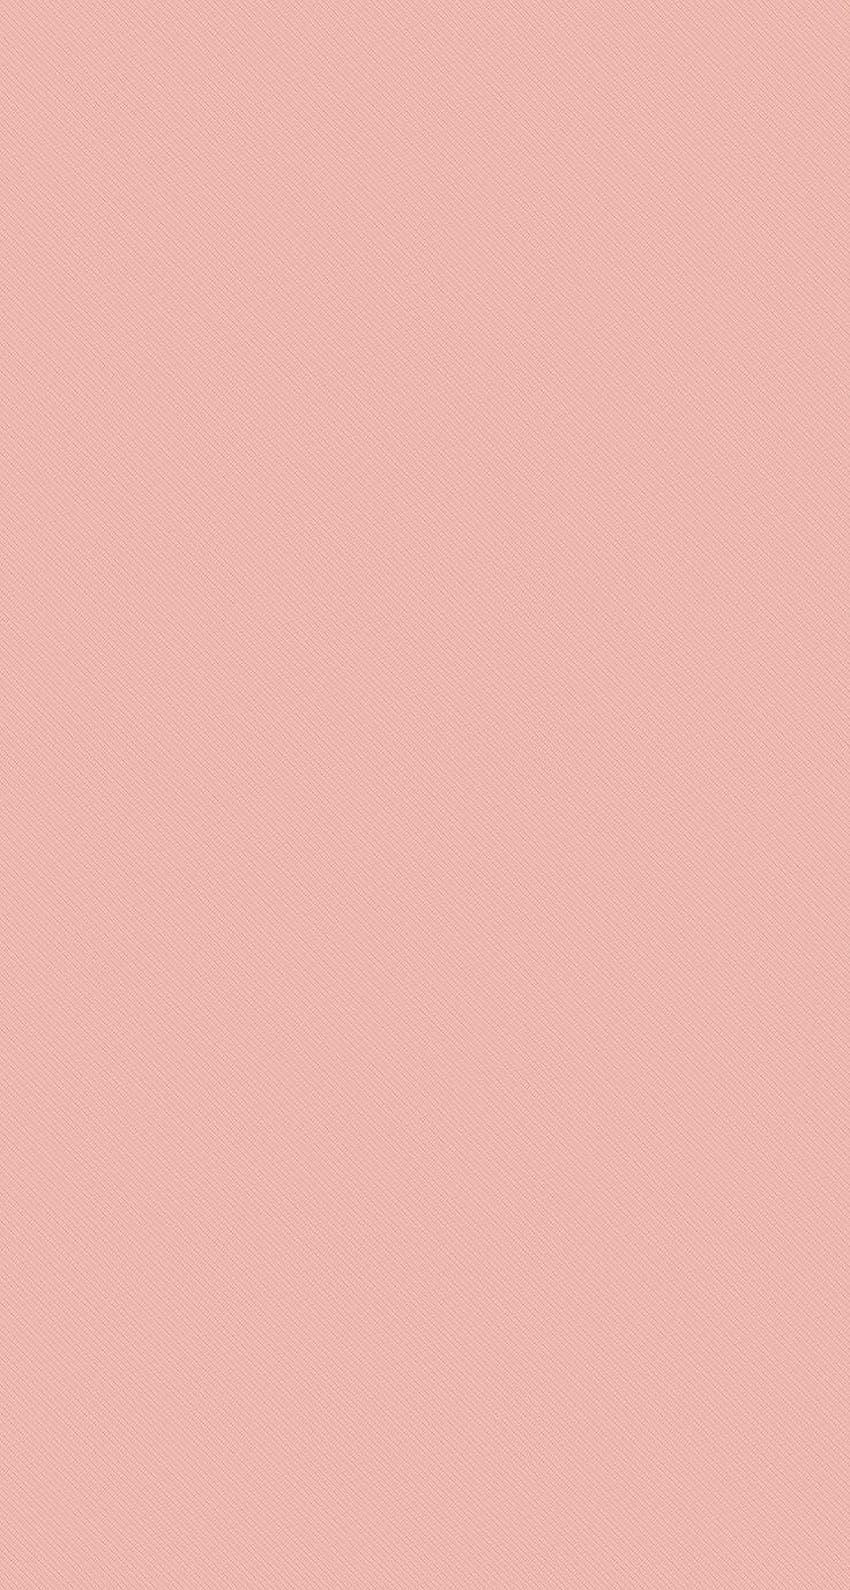 Pin on, computer solid pastel colors HD phone wallpaper